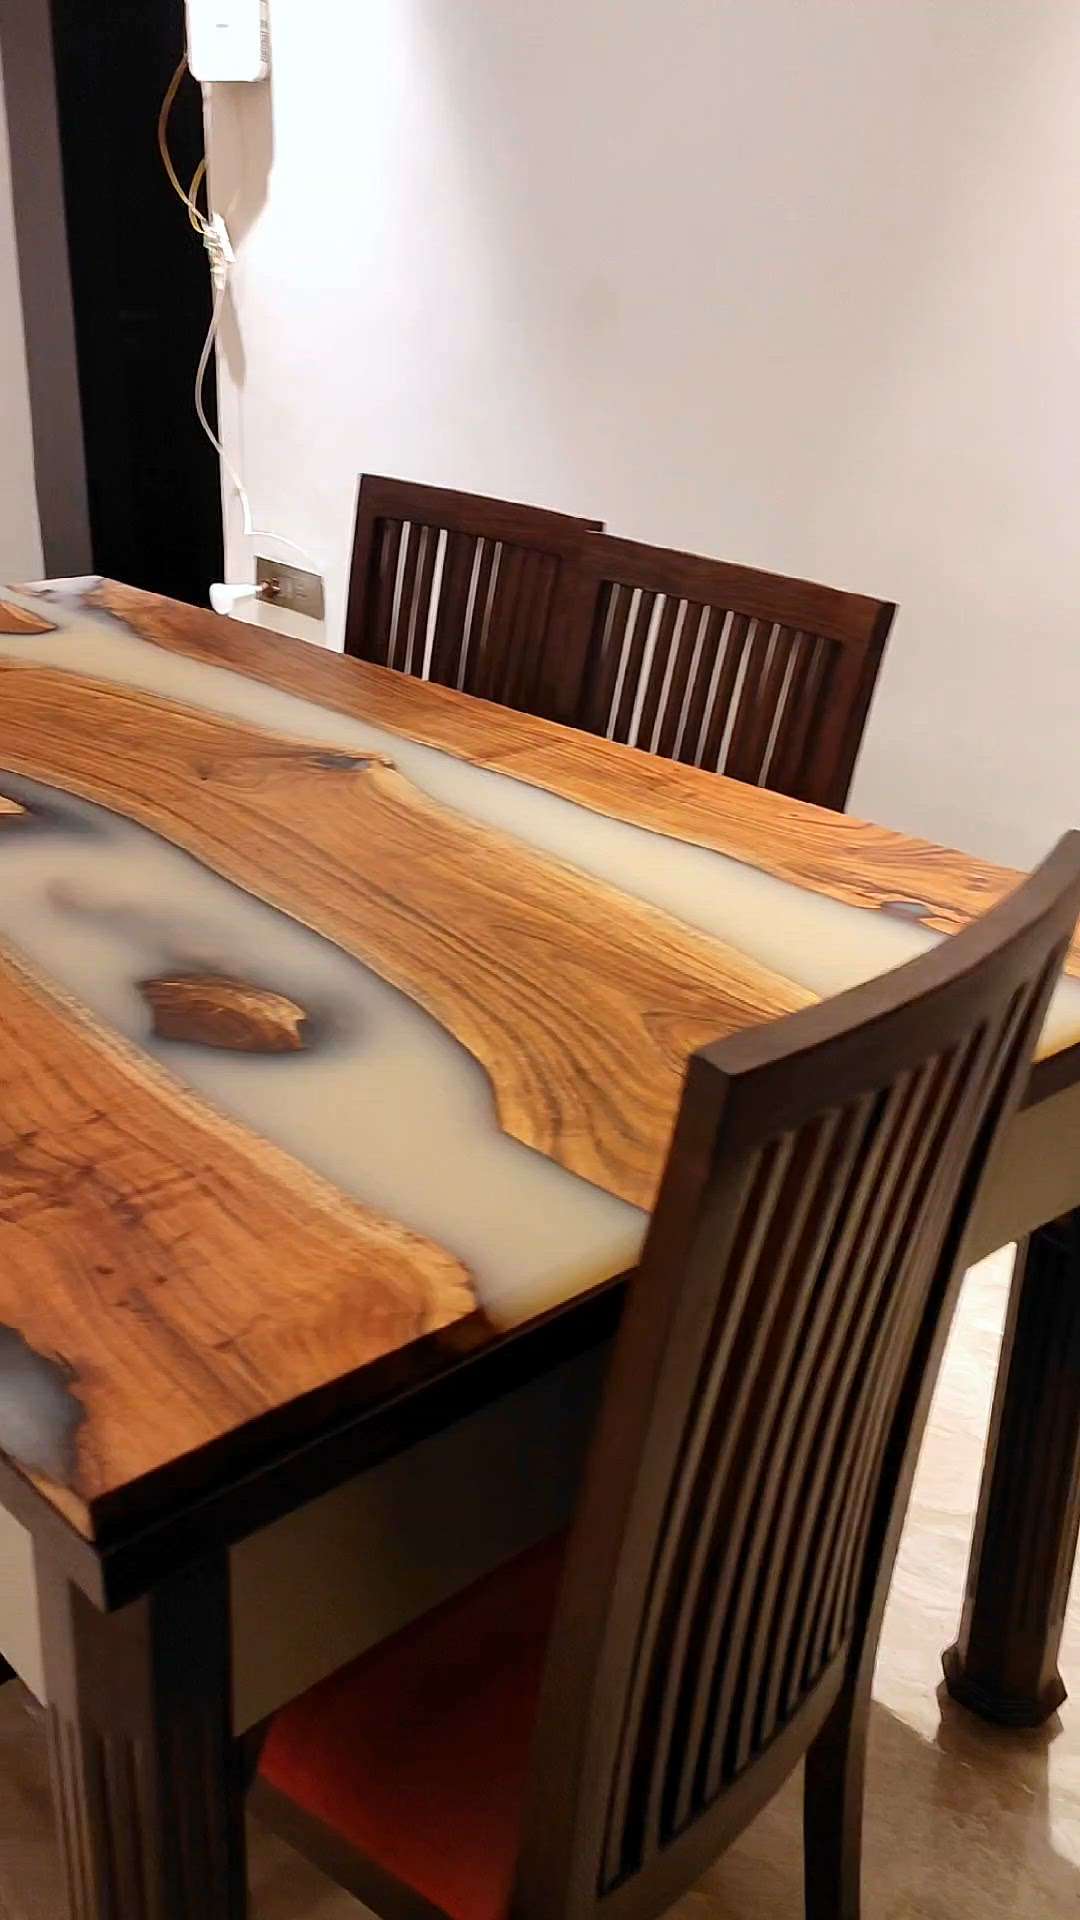 RESIN DINING TABLE
6FT. X 3.5FT.
2500₹/SQFT.
 #resintable #Architectural&Interior